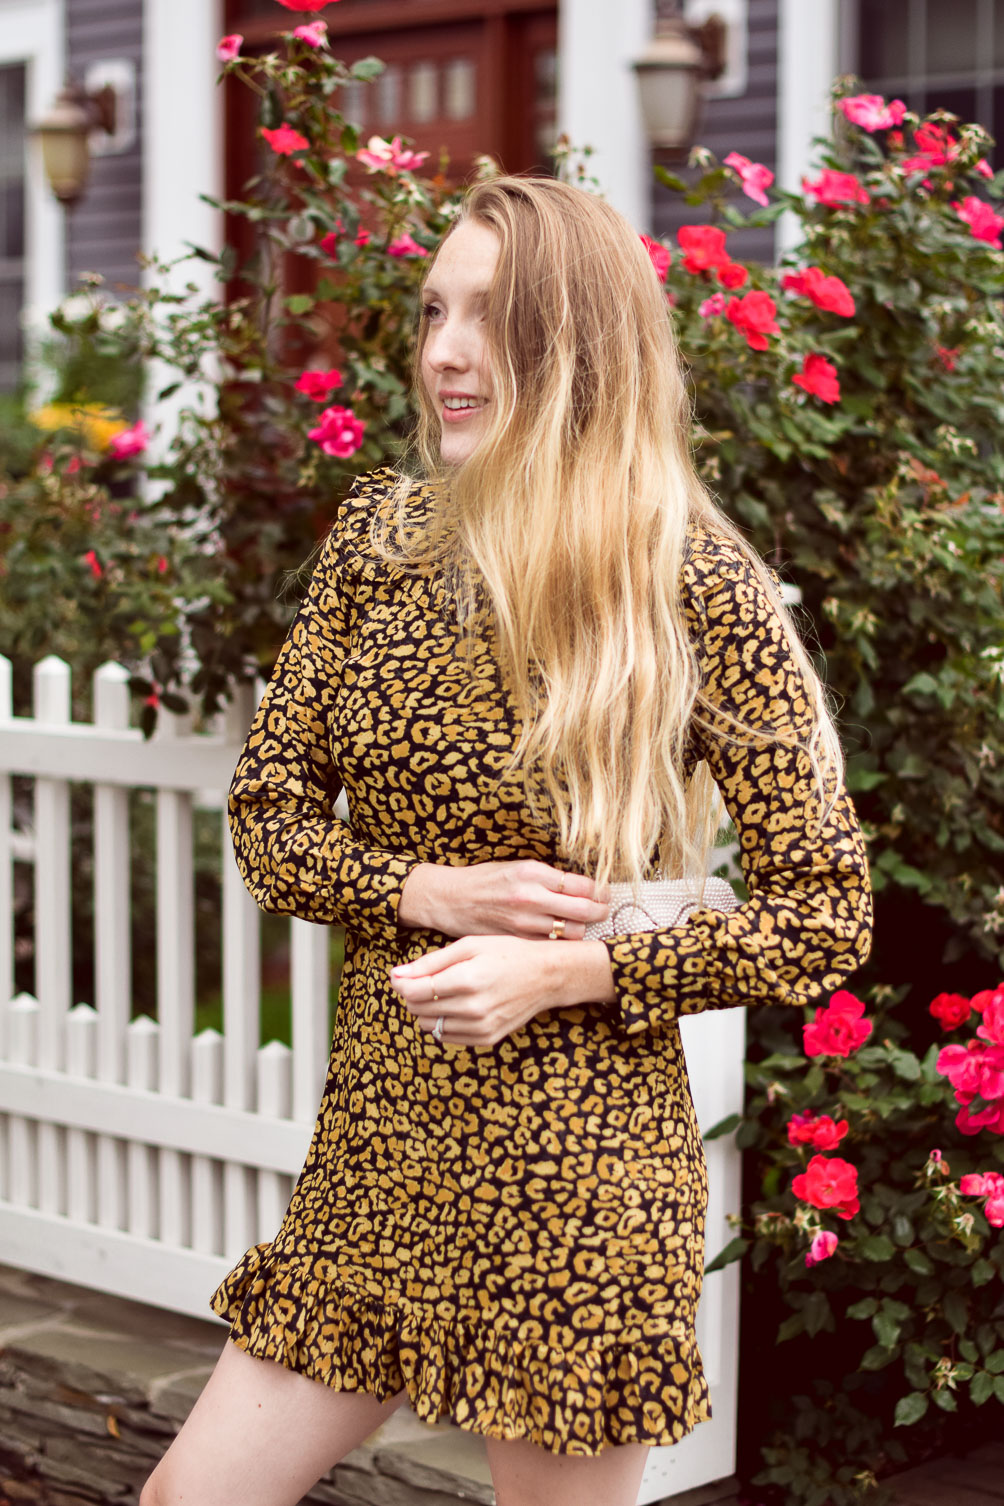 styling a cute fall outfit with this leopard print mini dress and white ankle boots